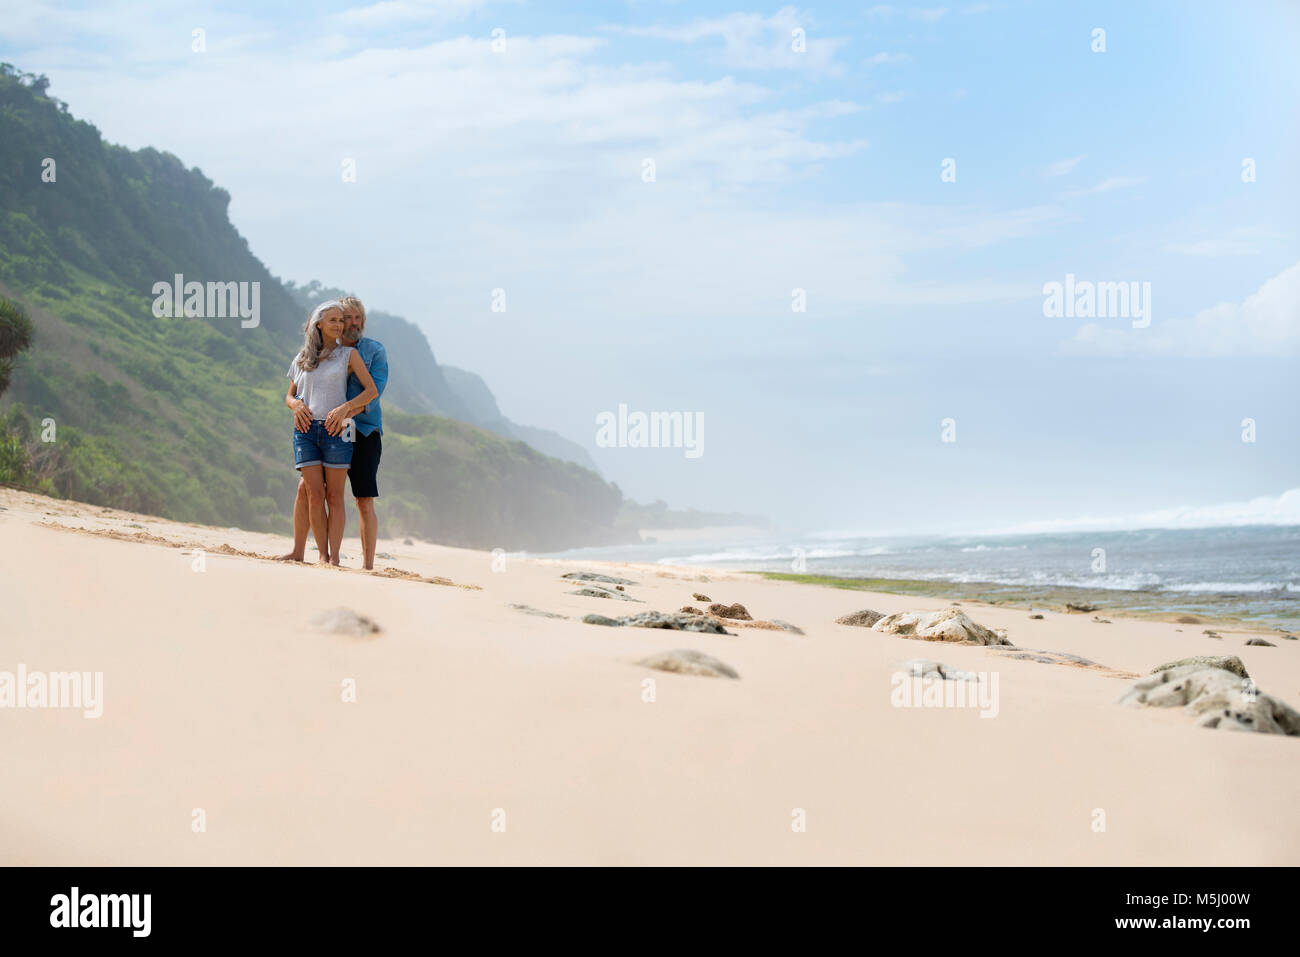 Romantic couple standing on the beach Banque D'Images